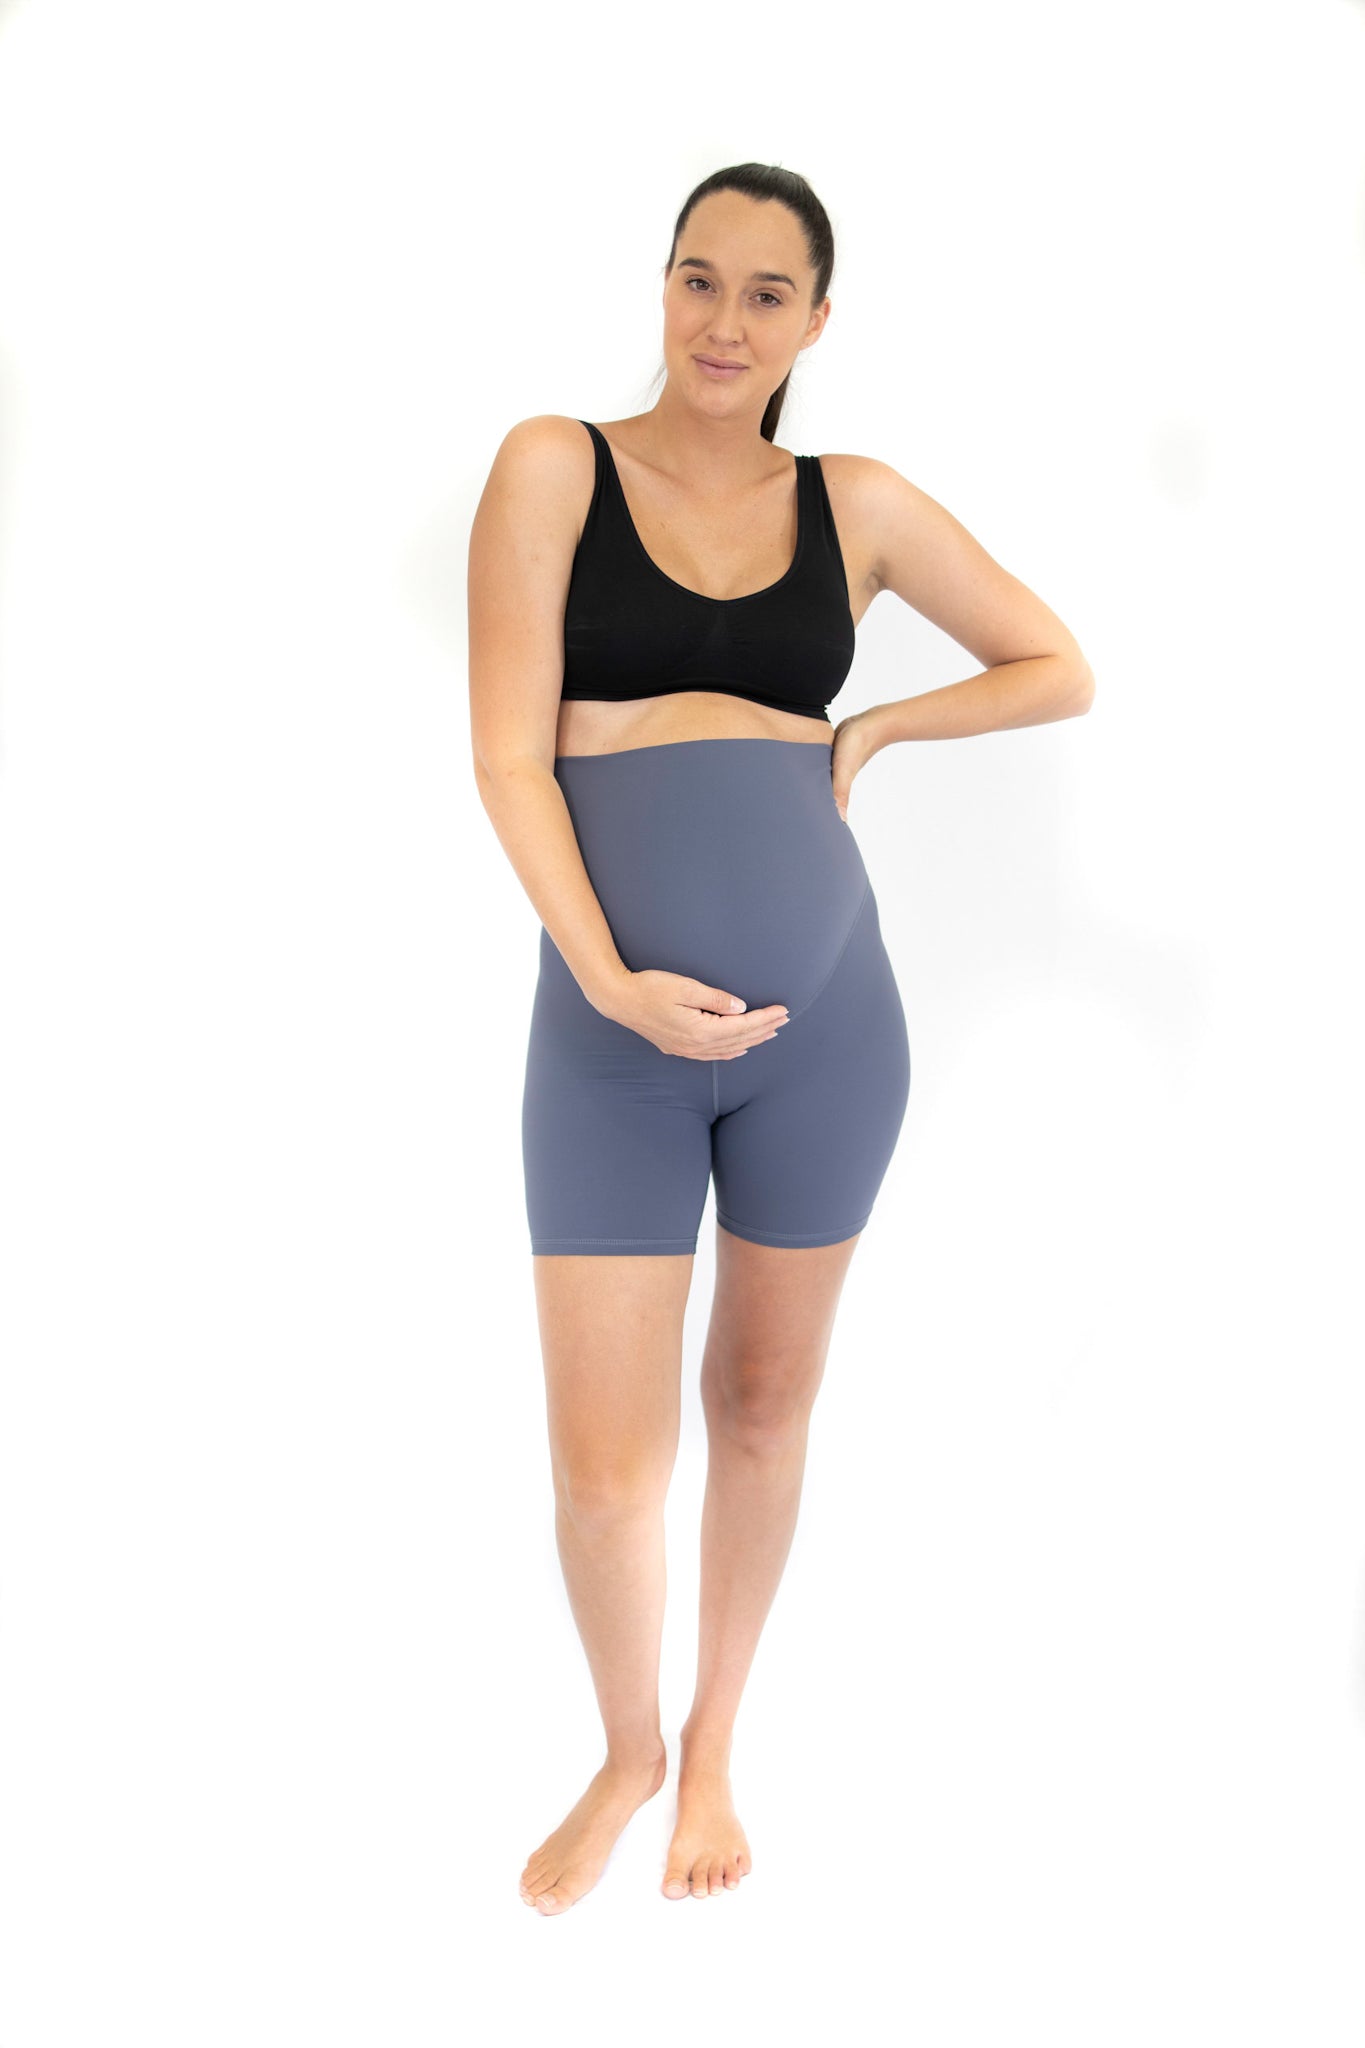 Belly Bandit Thighs Disguise Maternity Shapewear